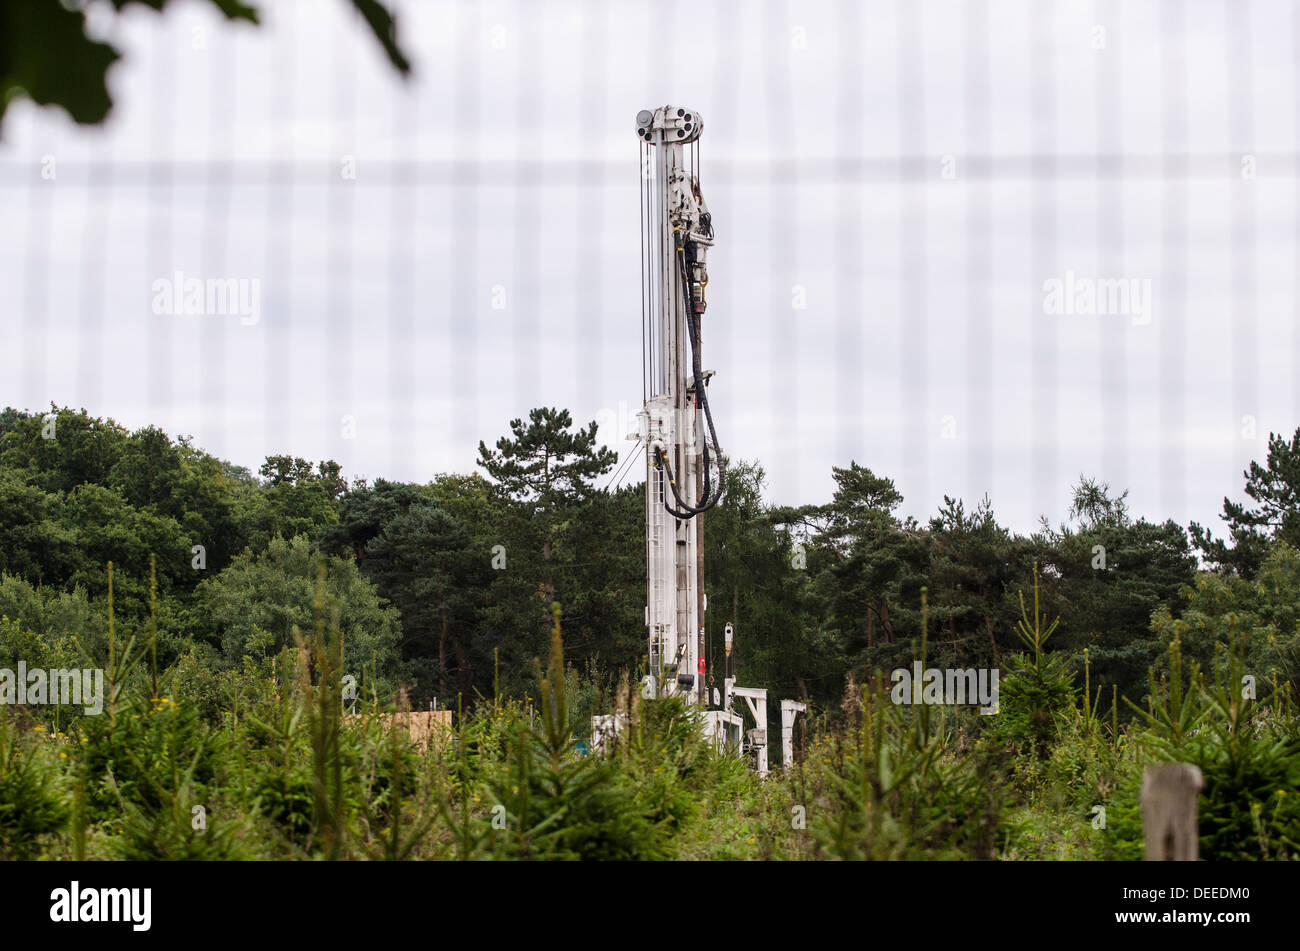 12th September 2013. Balcombe drilling rig stands behind fencing during anti-fracking protests, West Sussex, England, UK Stock Photo